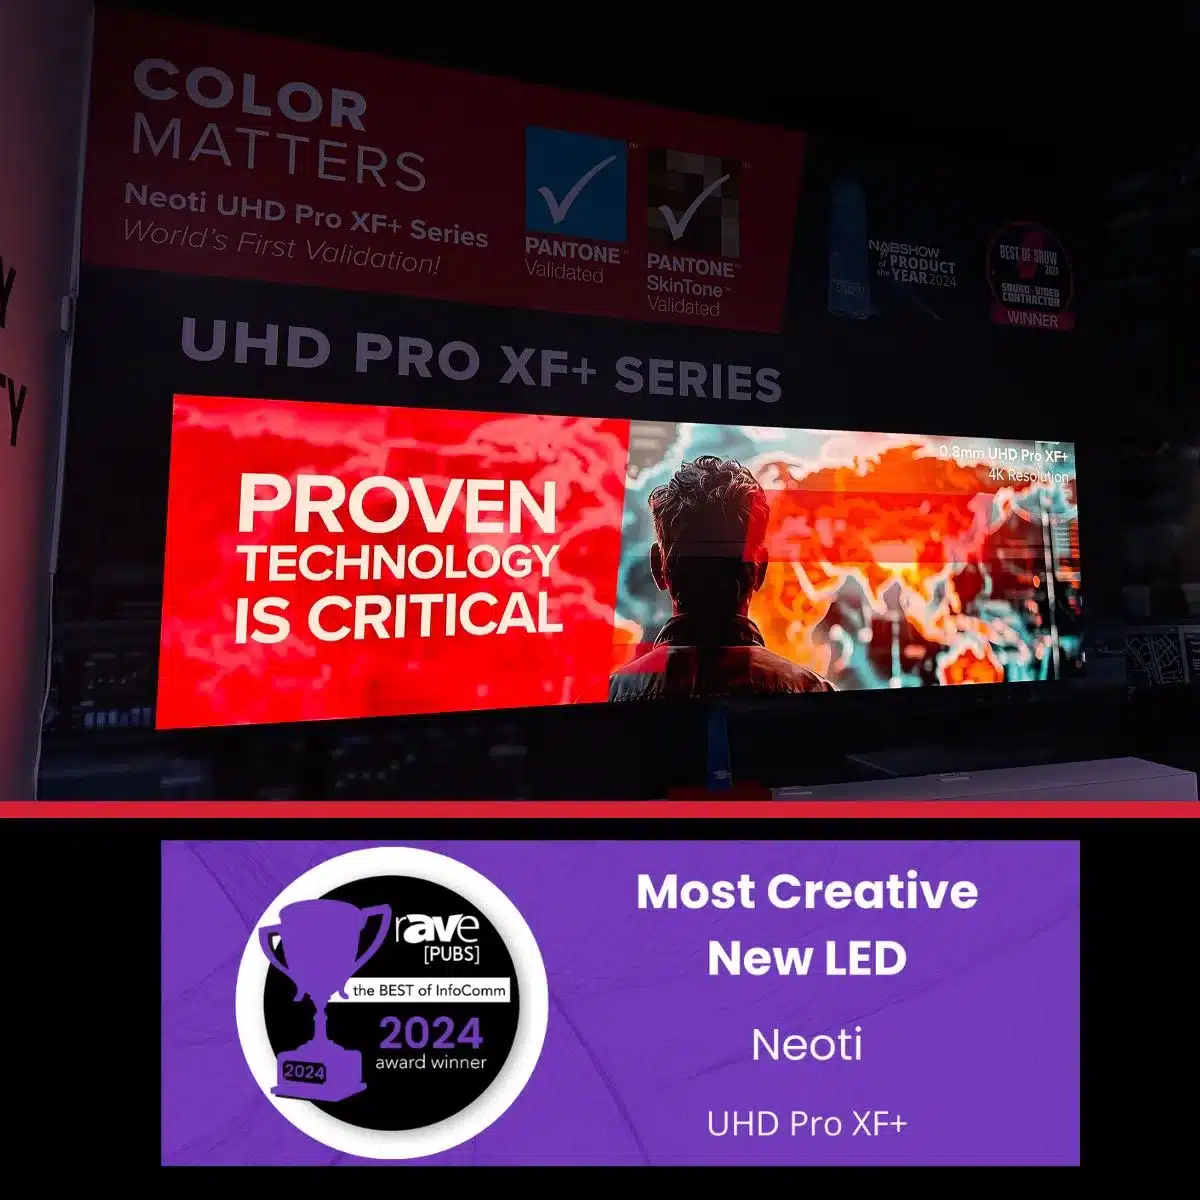 Neoti’s UHD Pro XF+ Named Most Creative New LED at InfoComm24